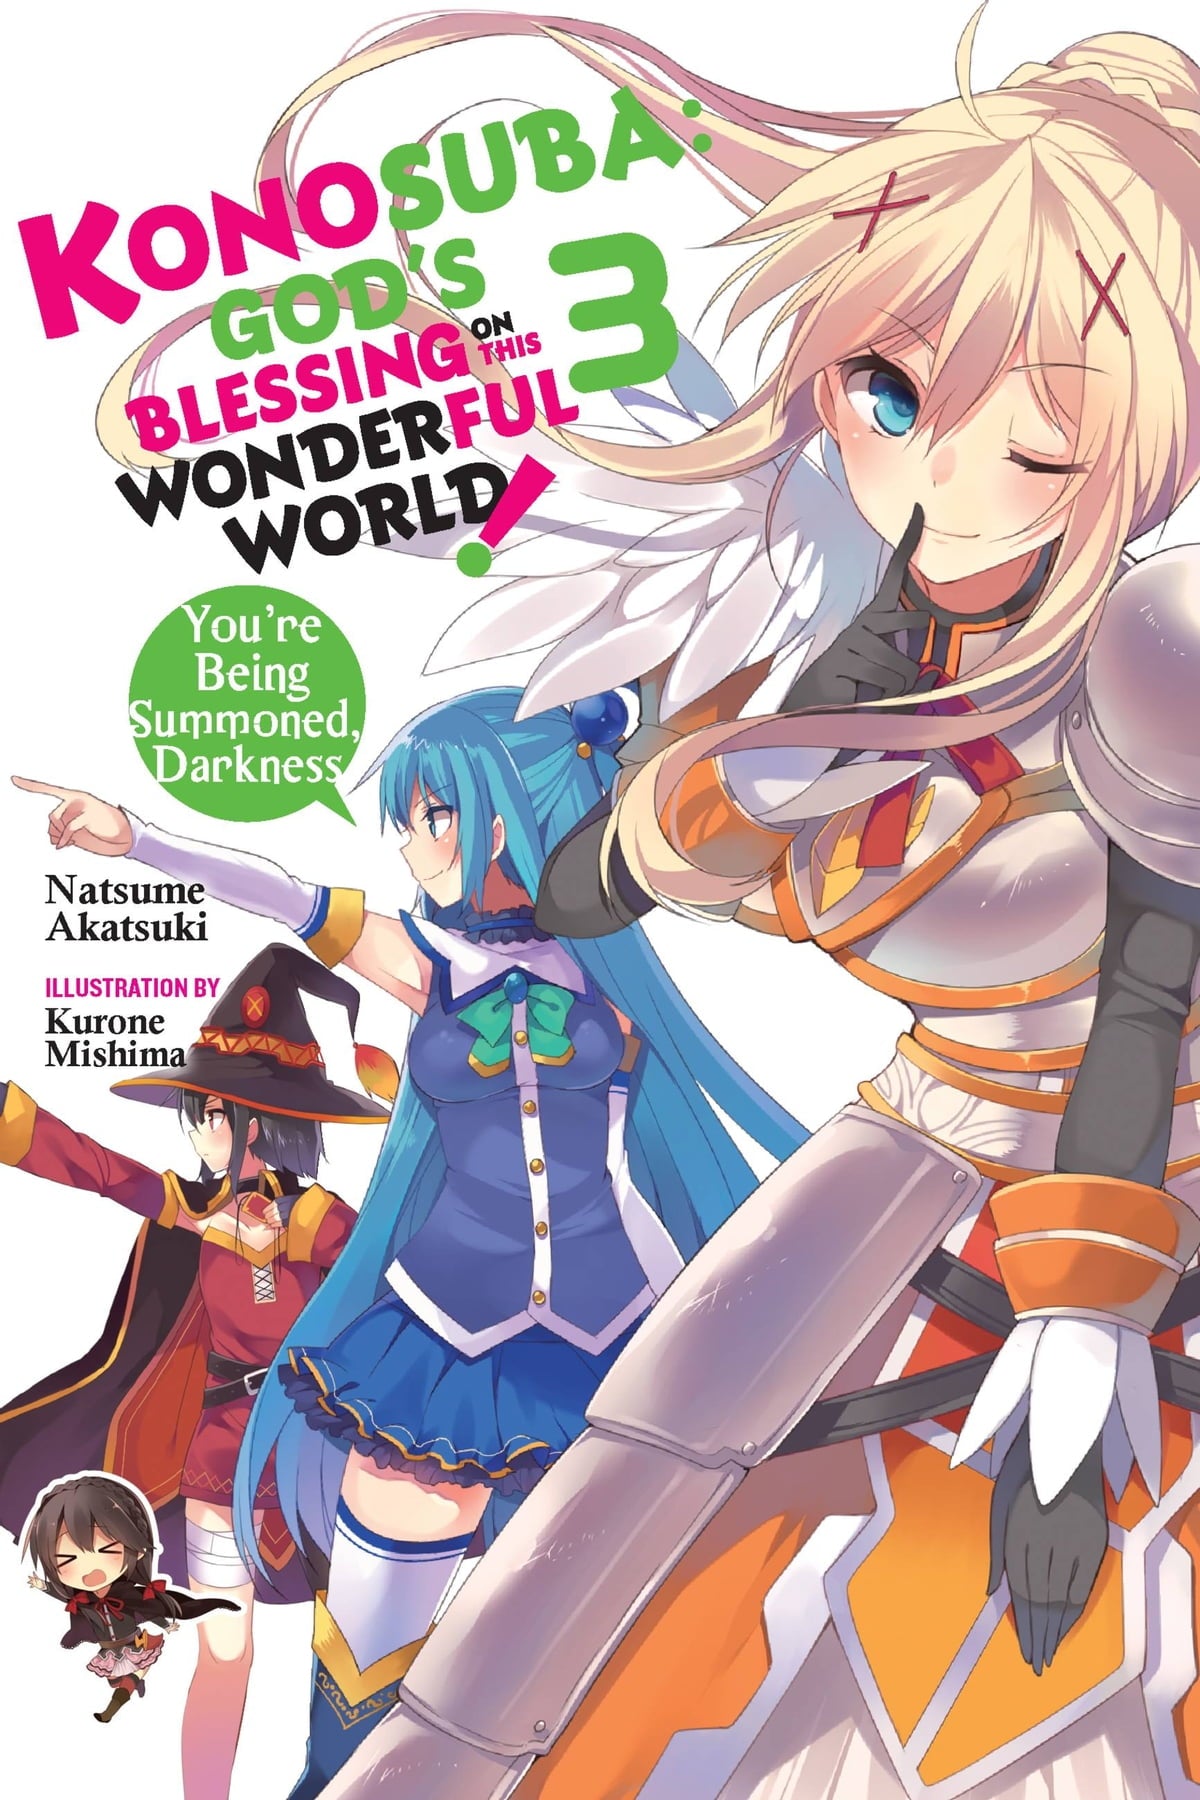 Konosuba: God's Blessing on This Wonderful World! Vol. 03 (Light Novel): You're Being Summoned, Darkness